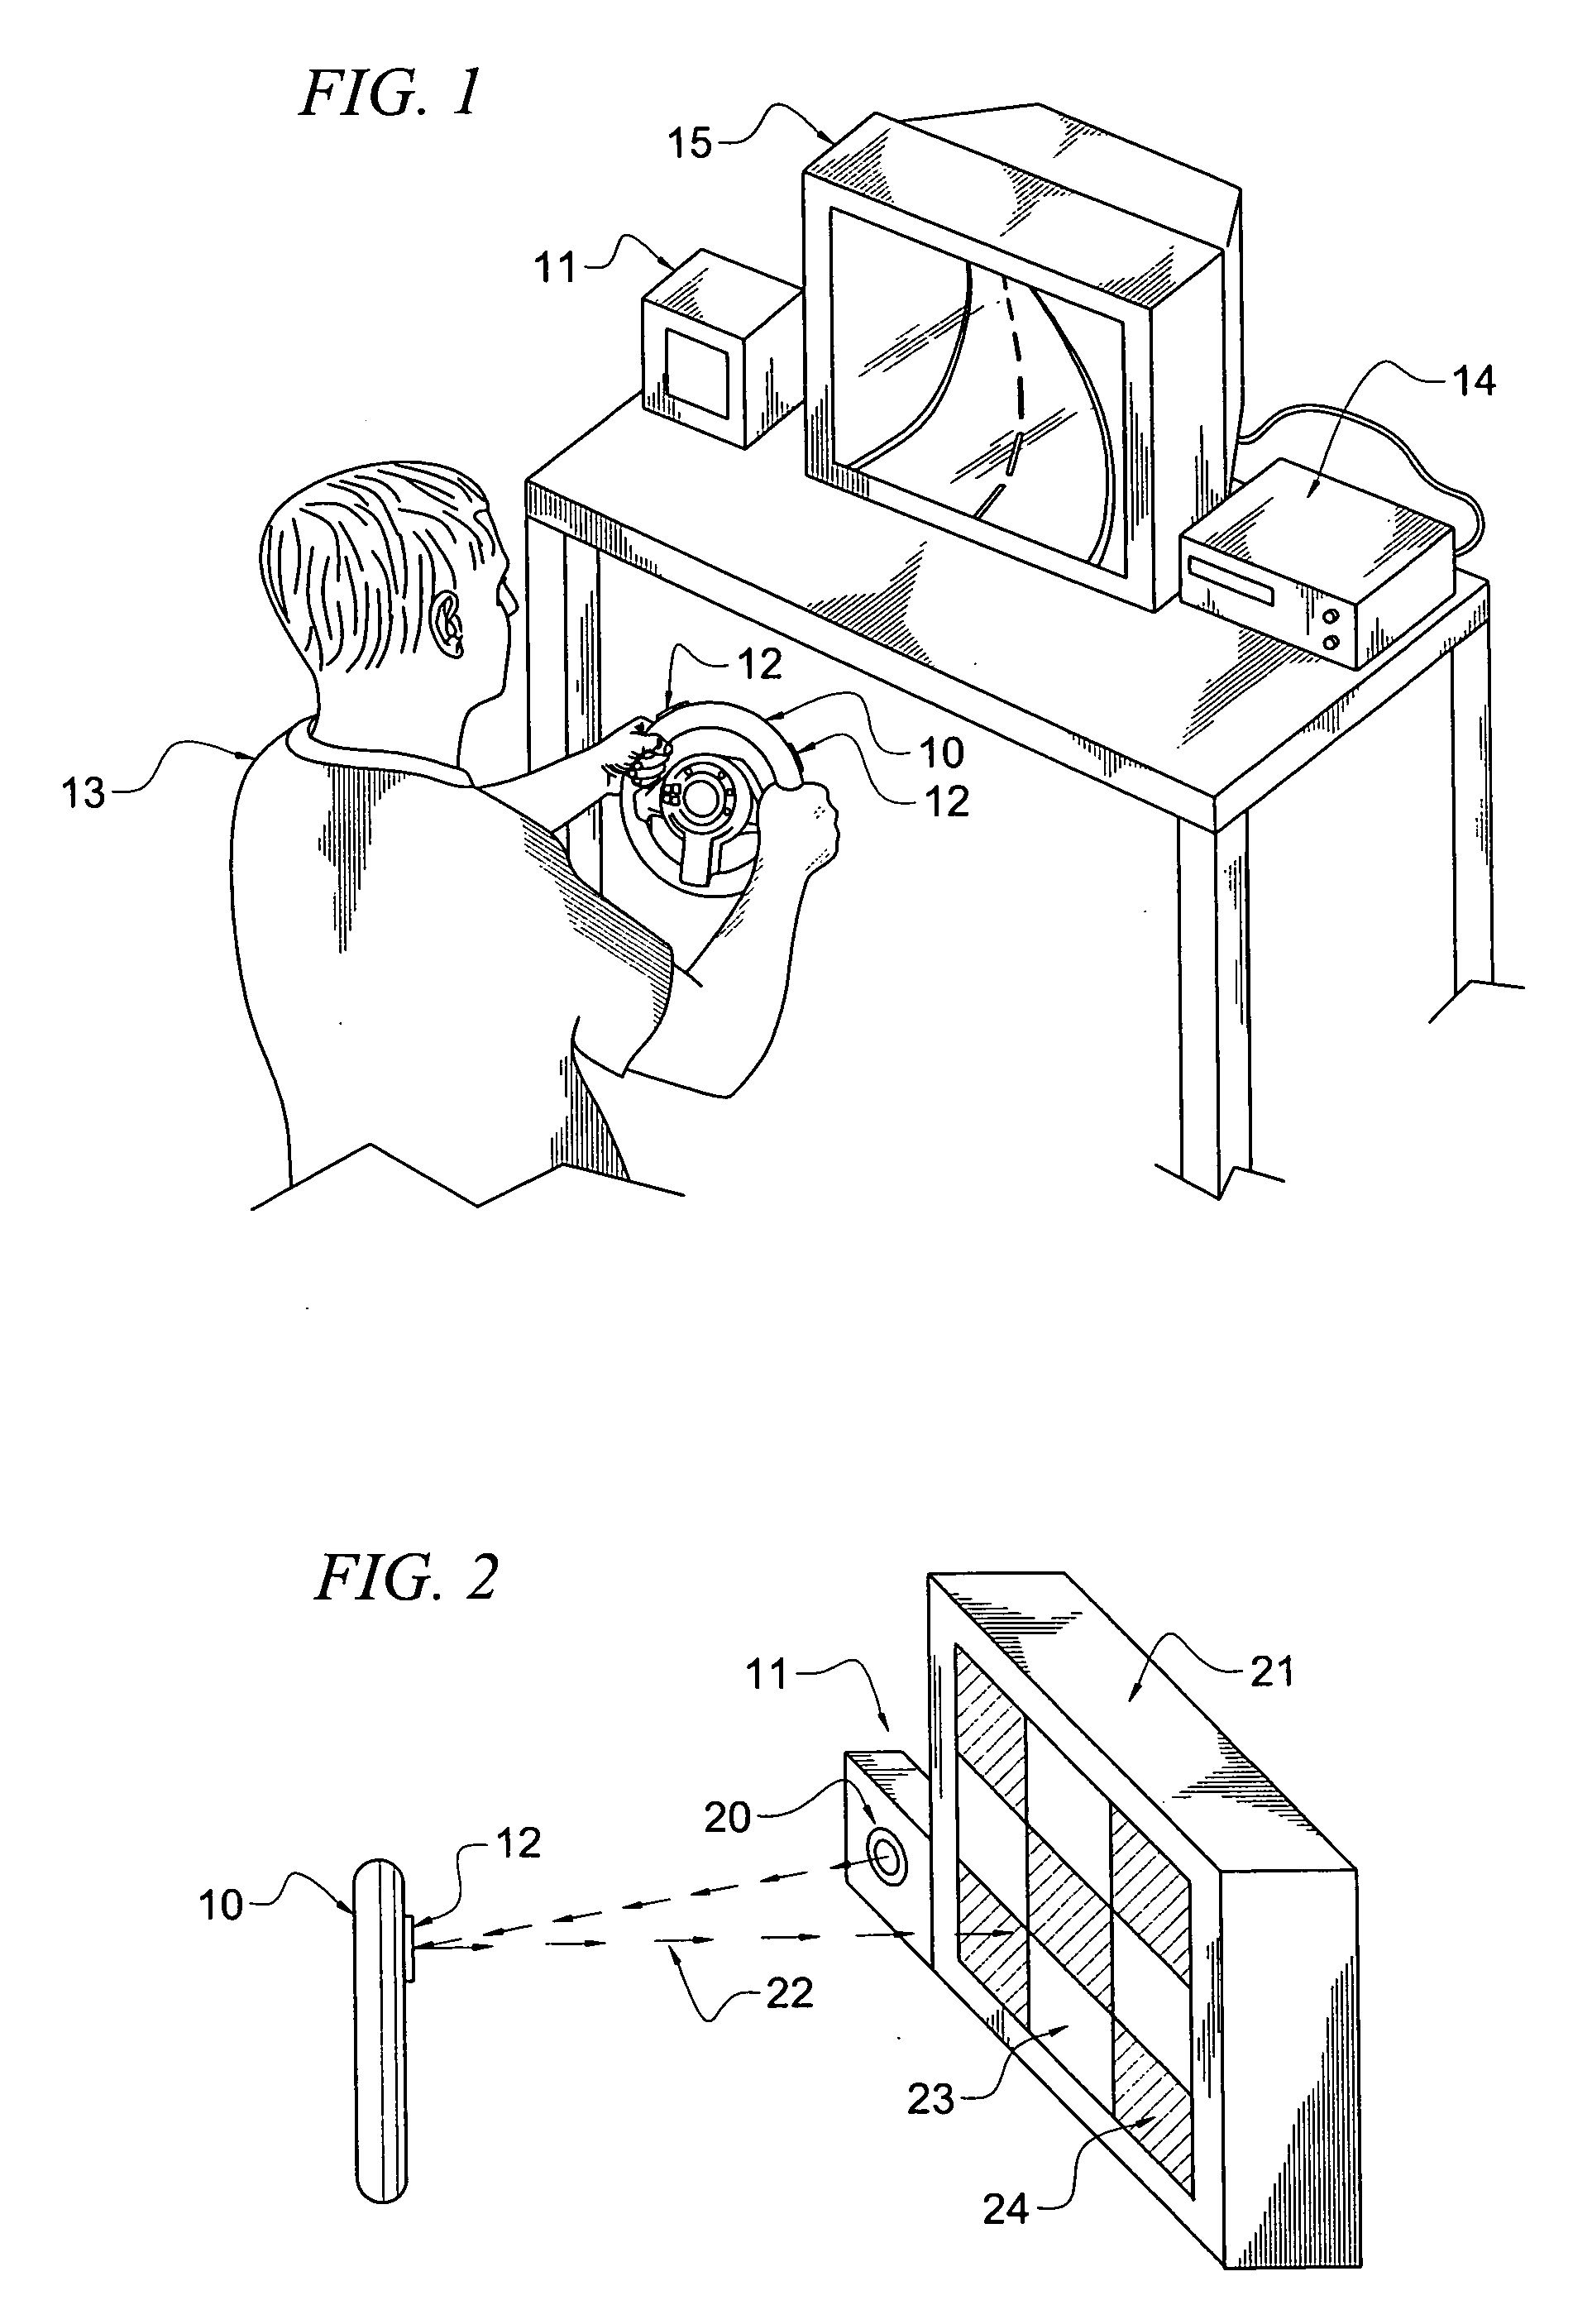 Free-standing input device